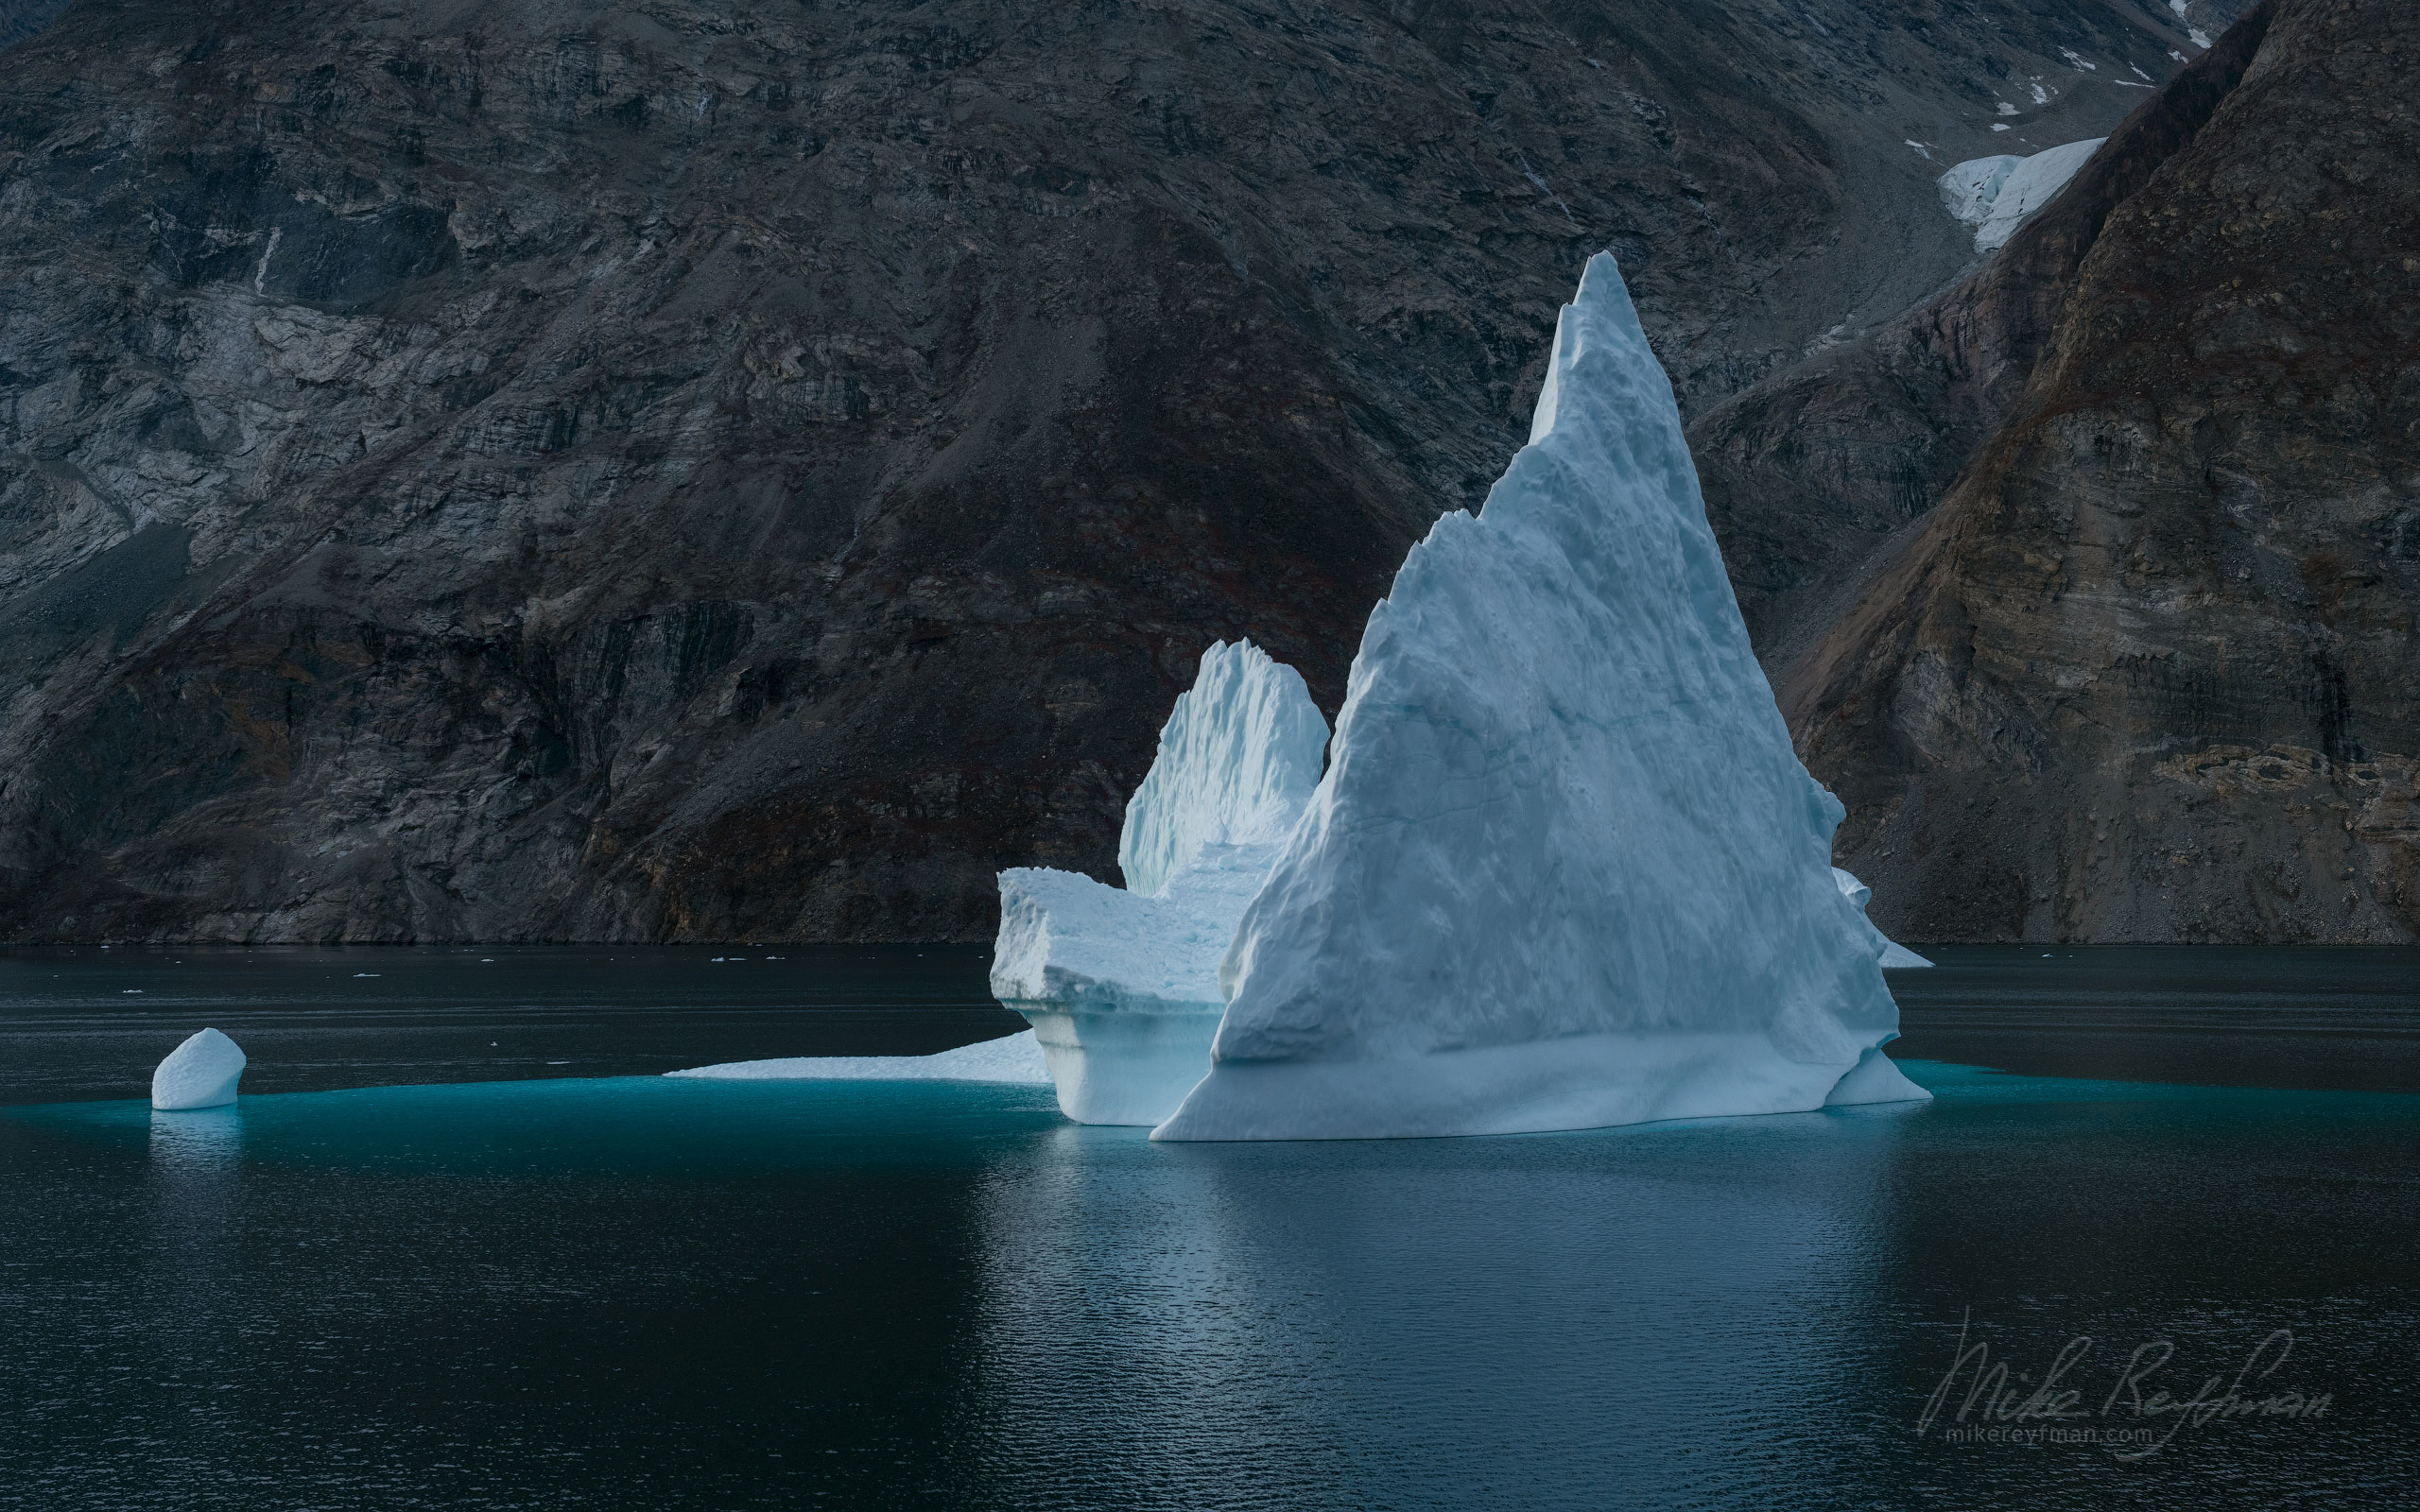 Iceberg in Scoresby Sund. Greenland. 030-GR-SC_50B7076 - The Scoresby Sund fjord system and the settlement of Ittoqqortoormiit. East Greenland. - Mike Reyfman Photography